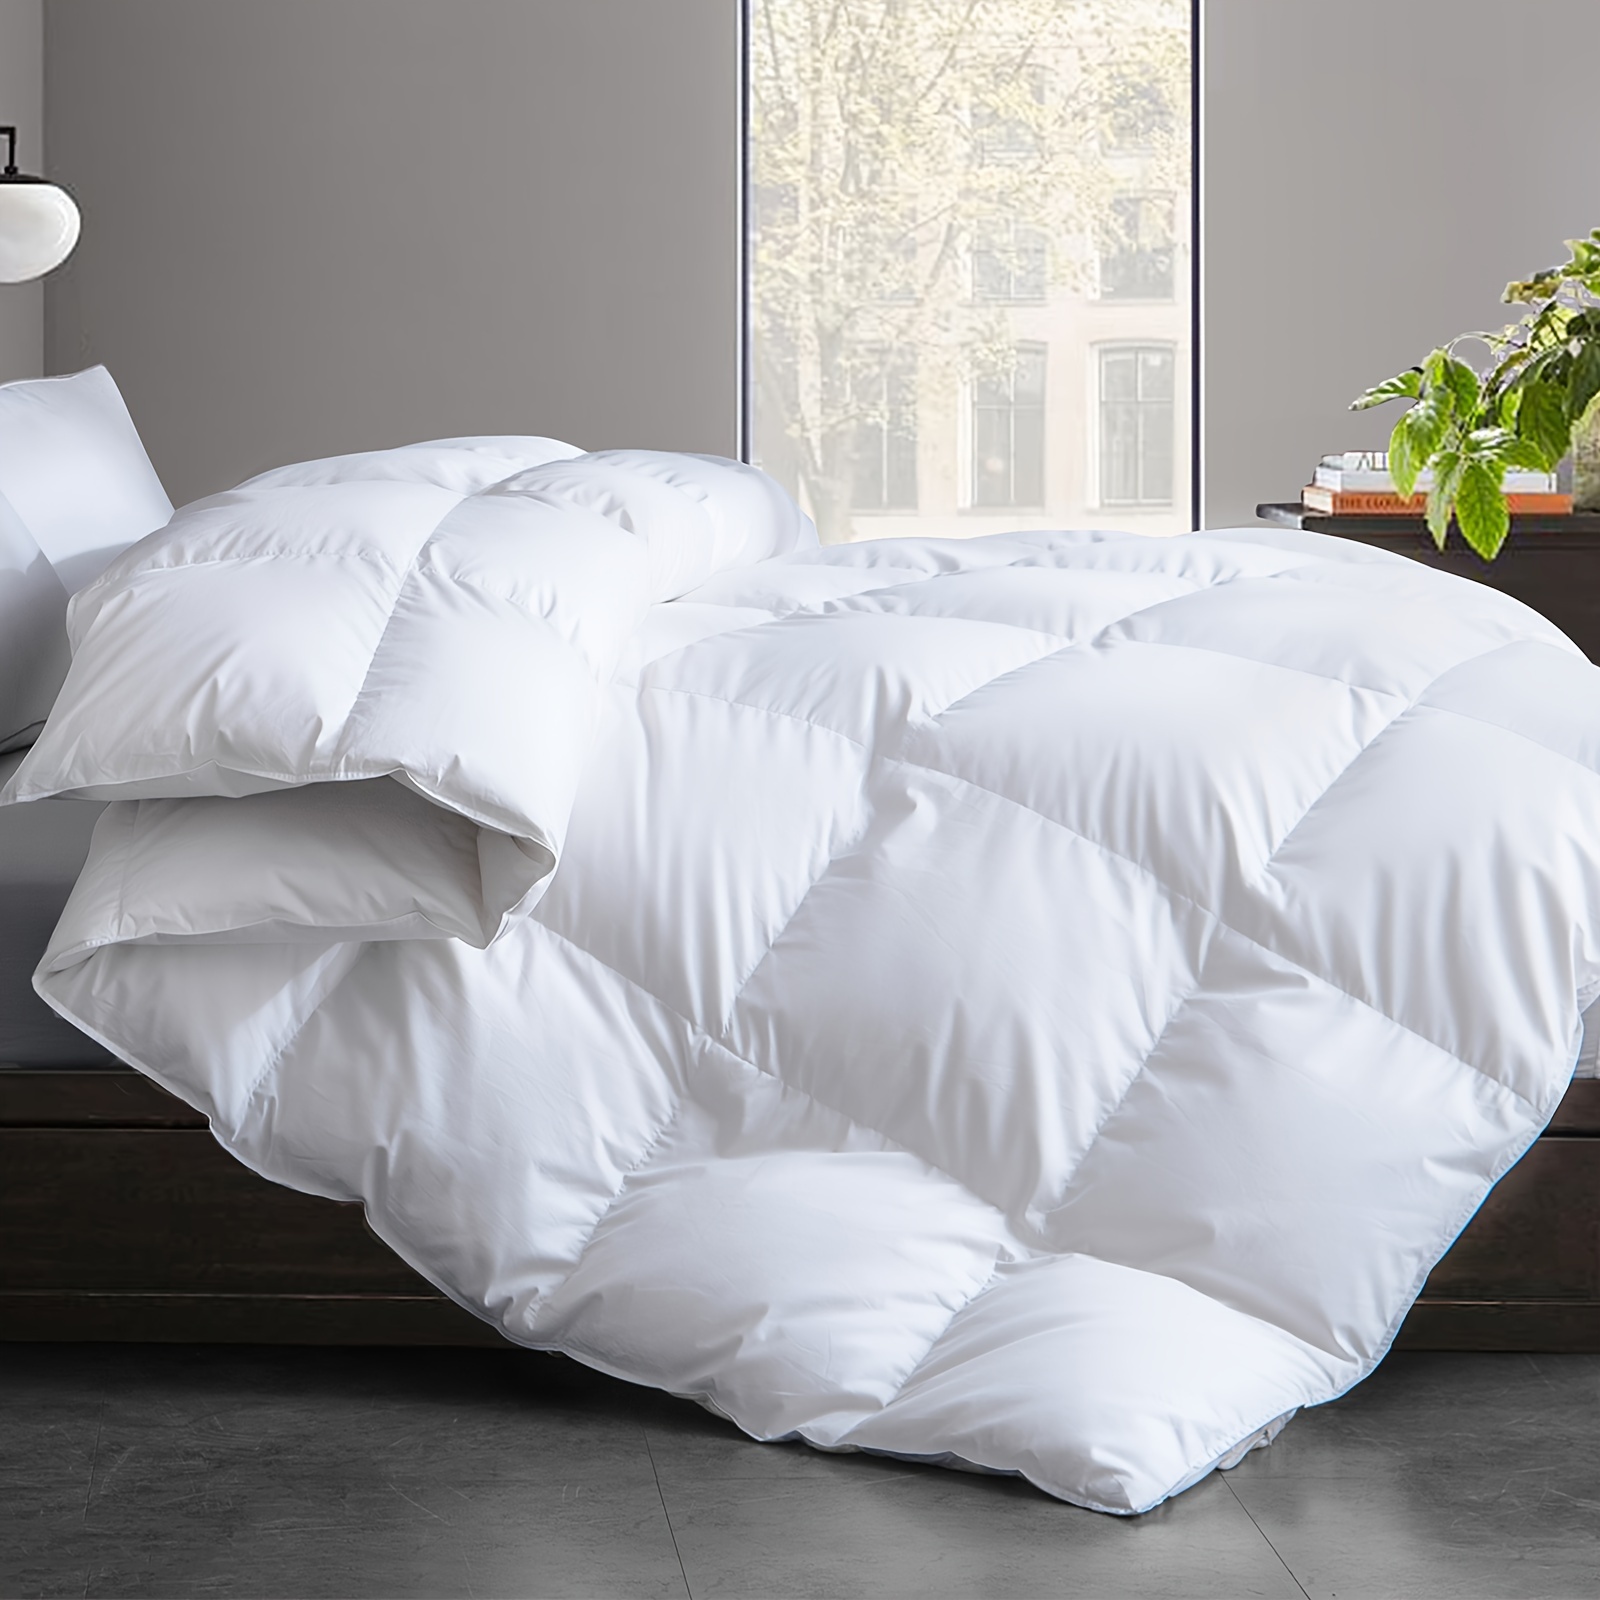 

Goose Feather Down Comforter - All Season Duvet Insert, Medium Warmth Hotel Collection Bed Comforters, Fluffy And Cozy